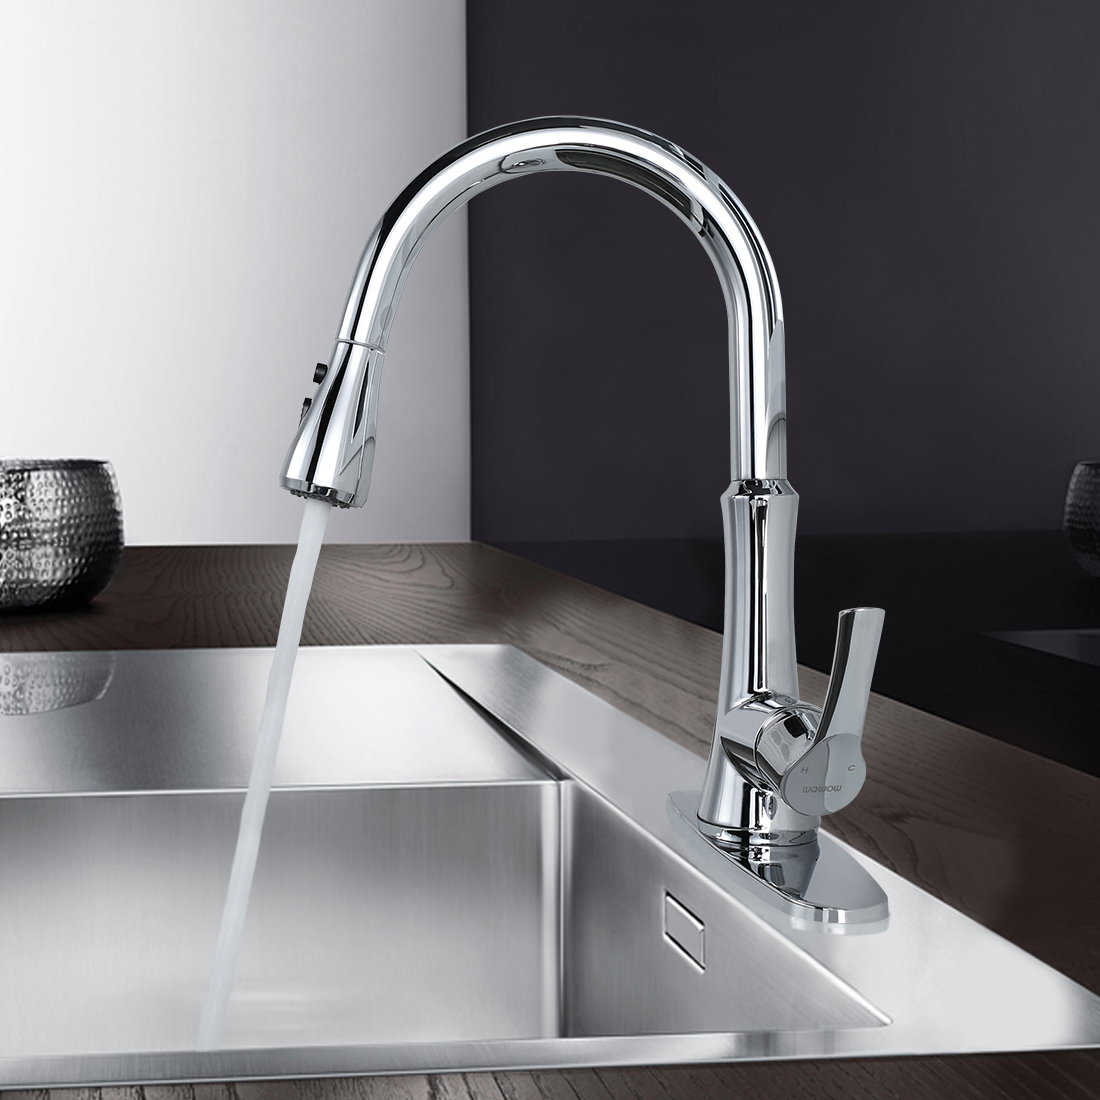 Three thoughts on the new national standard of faucet